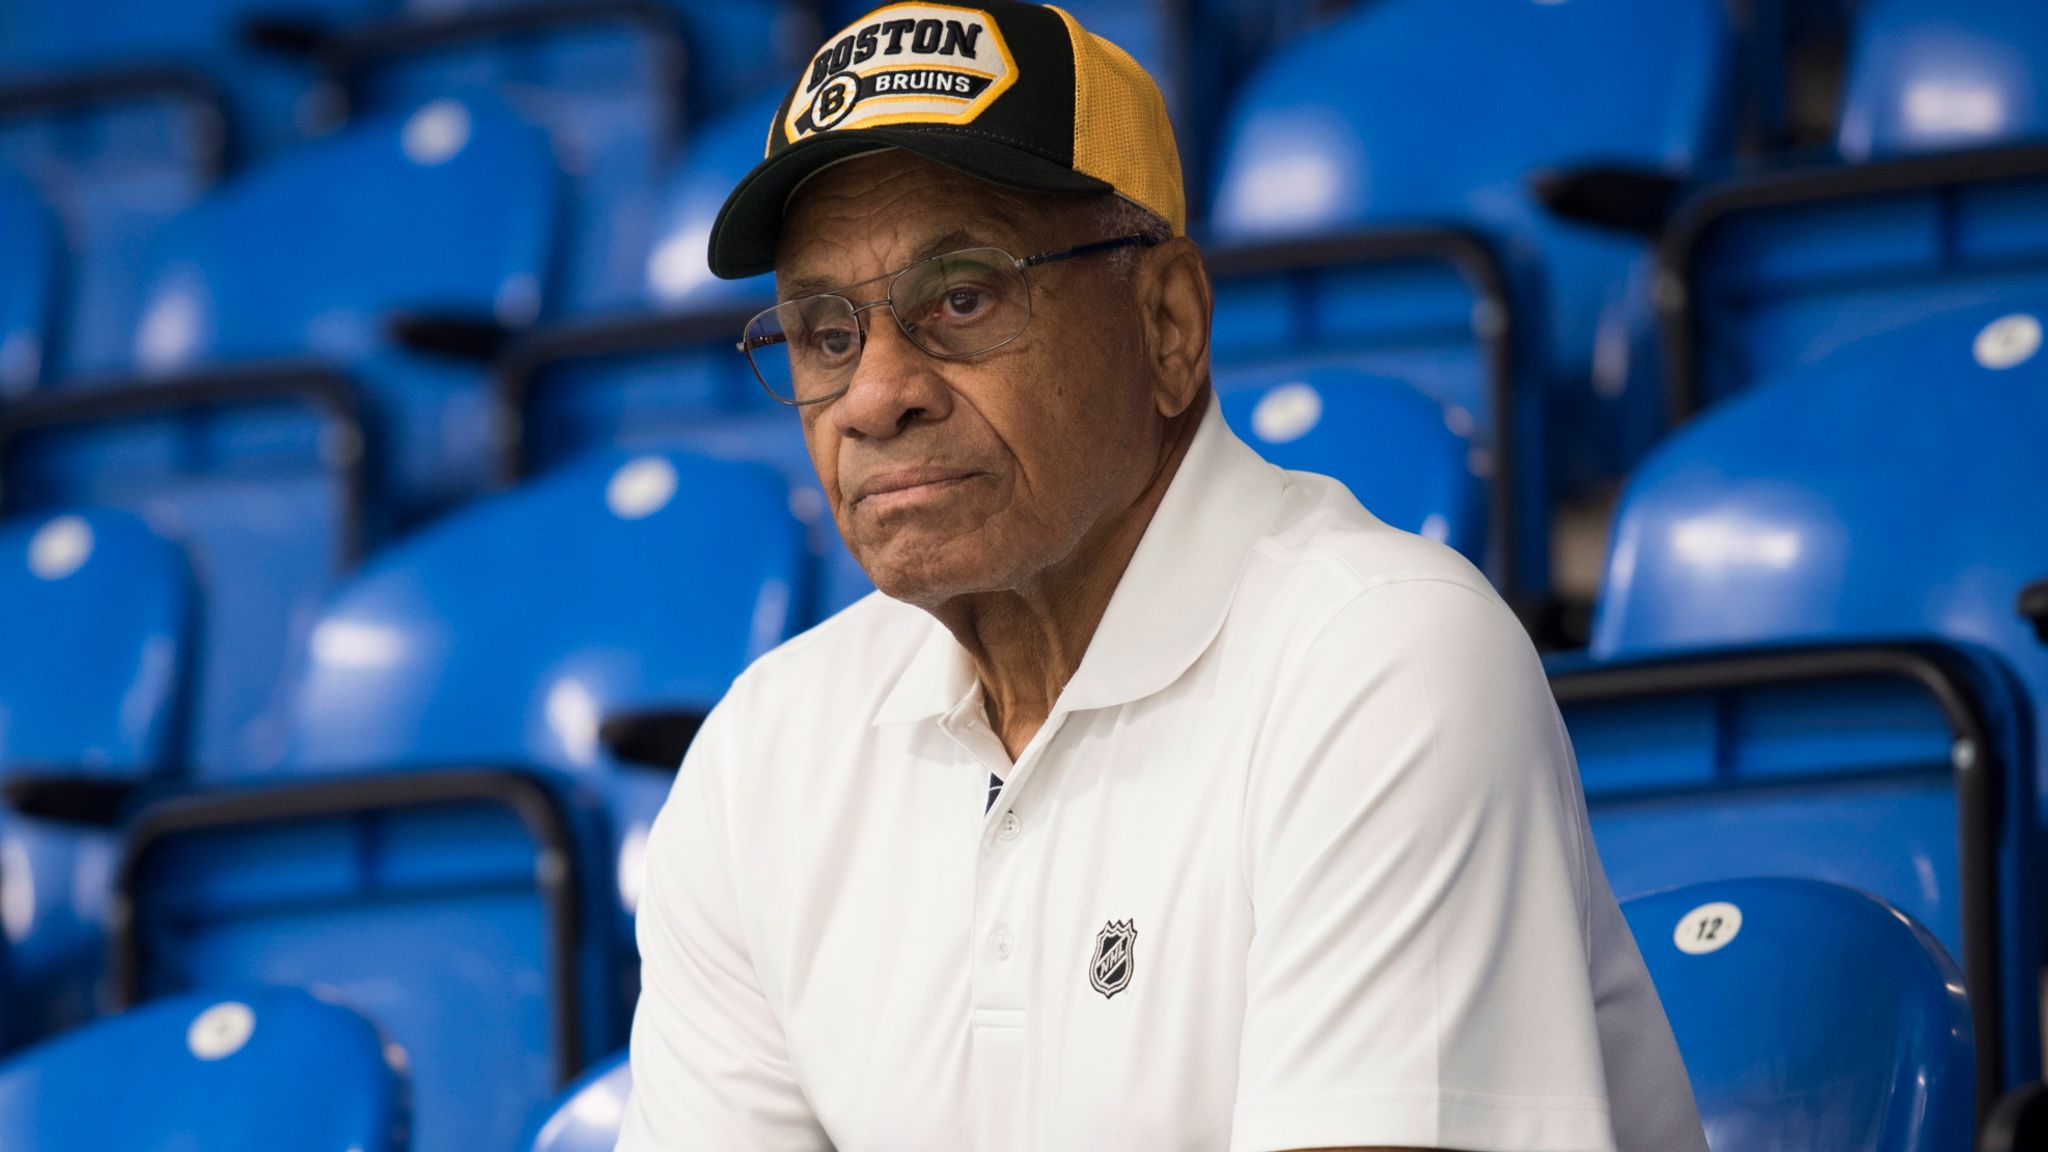 Bruins To Retire Number Of Willie O'Ree, First Black NHL Player, Next Month